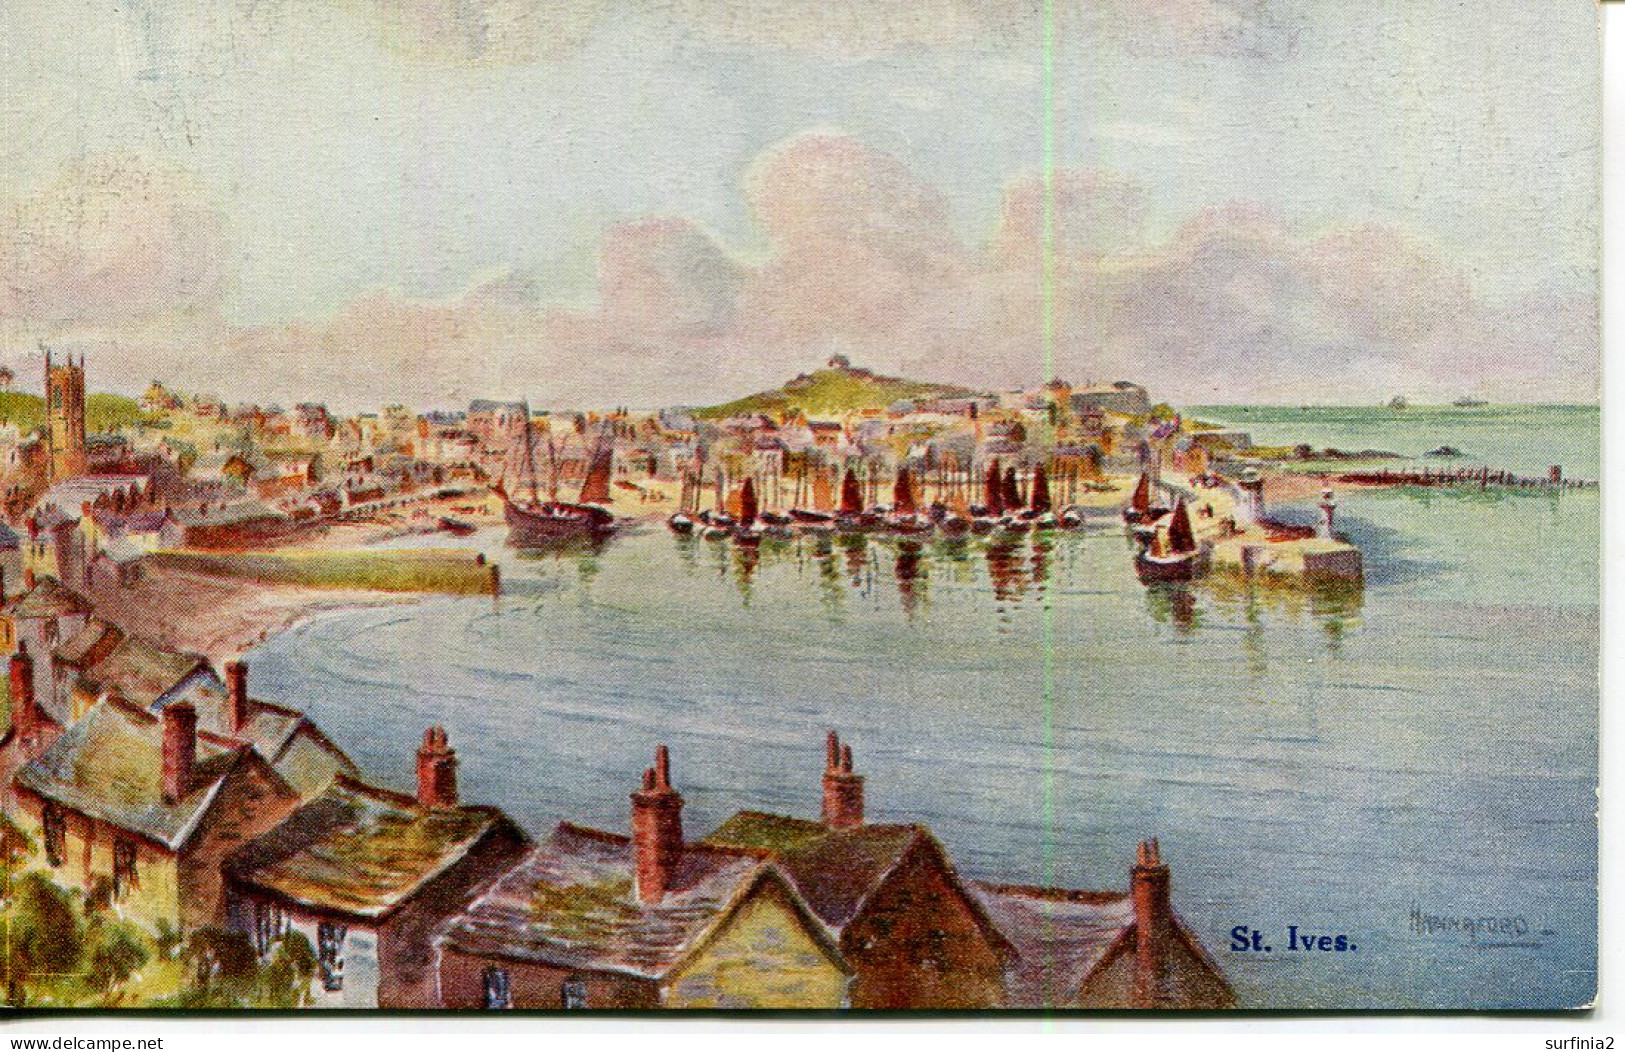 MISCELLANEOUS ART - ST IVES By HANNAFORD Art547 - St.Ives